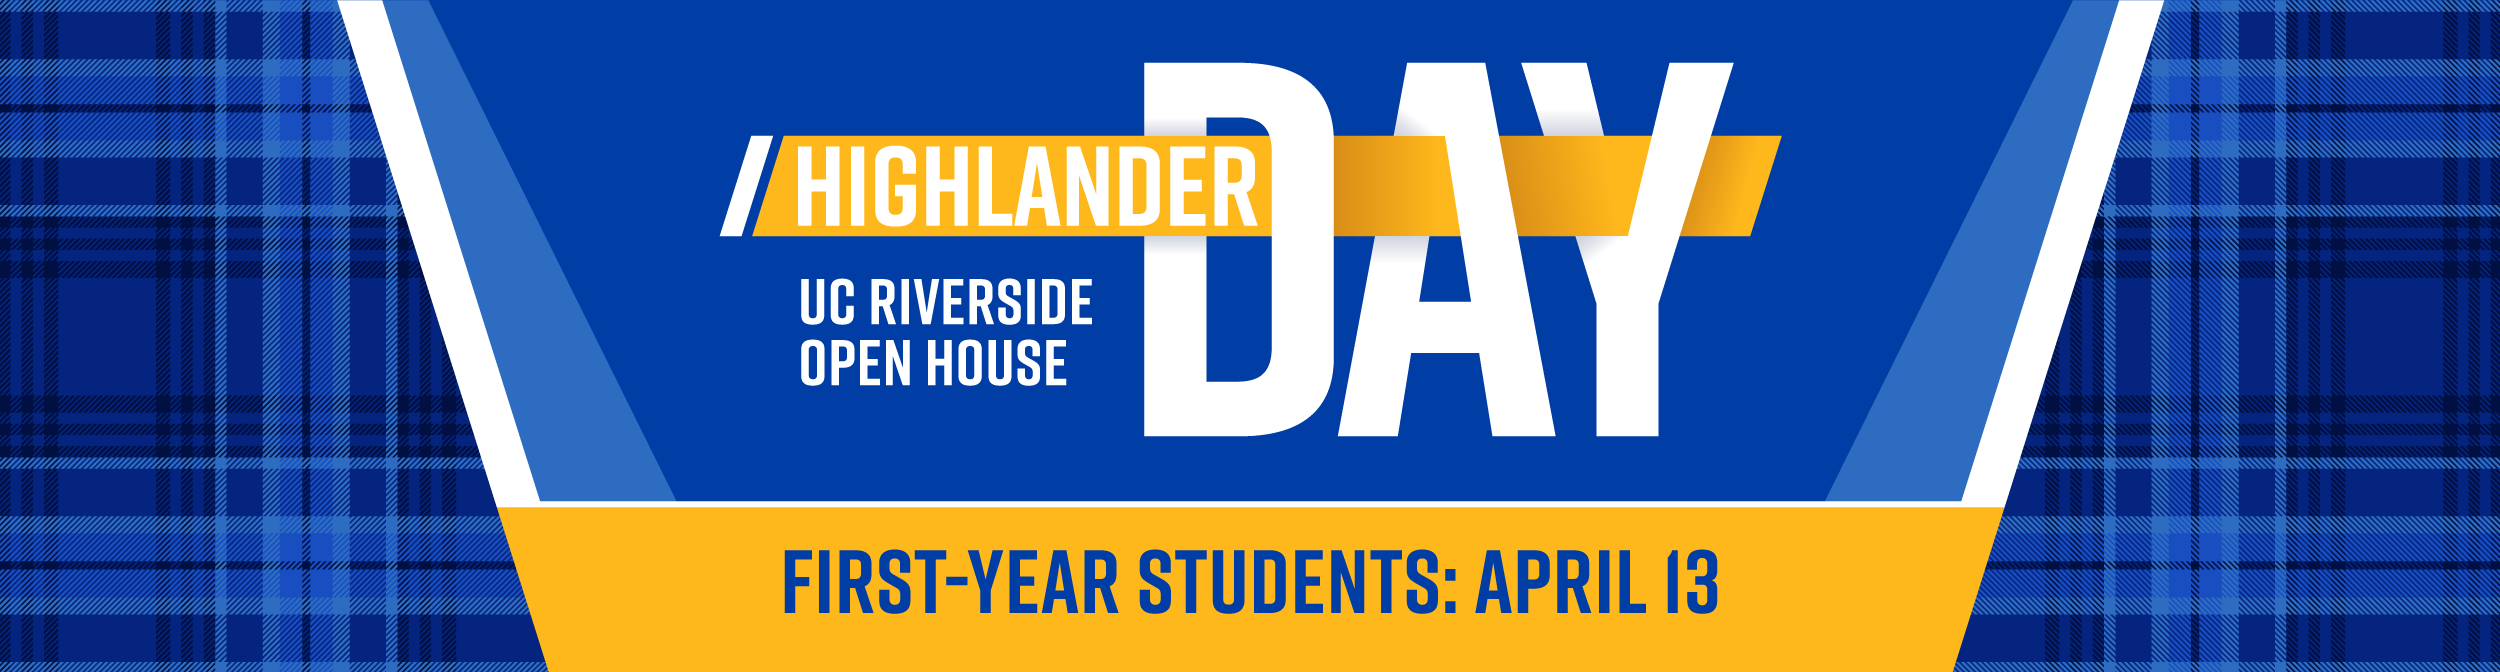 Graphic promo for UCR's Highlander Day on April 13 - An open house for admitted first-year students and their families.